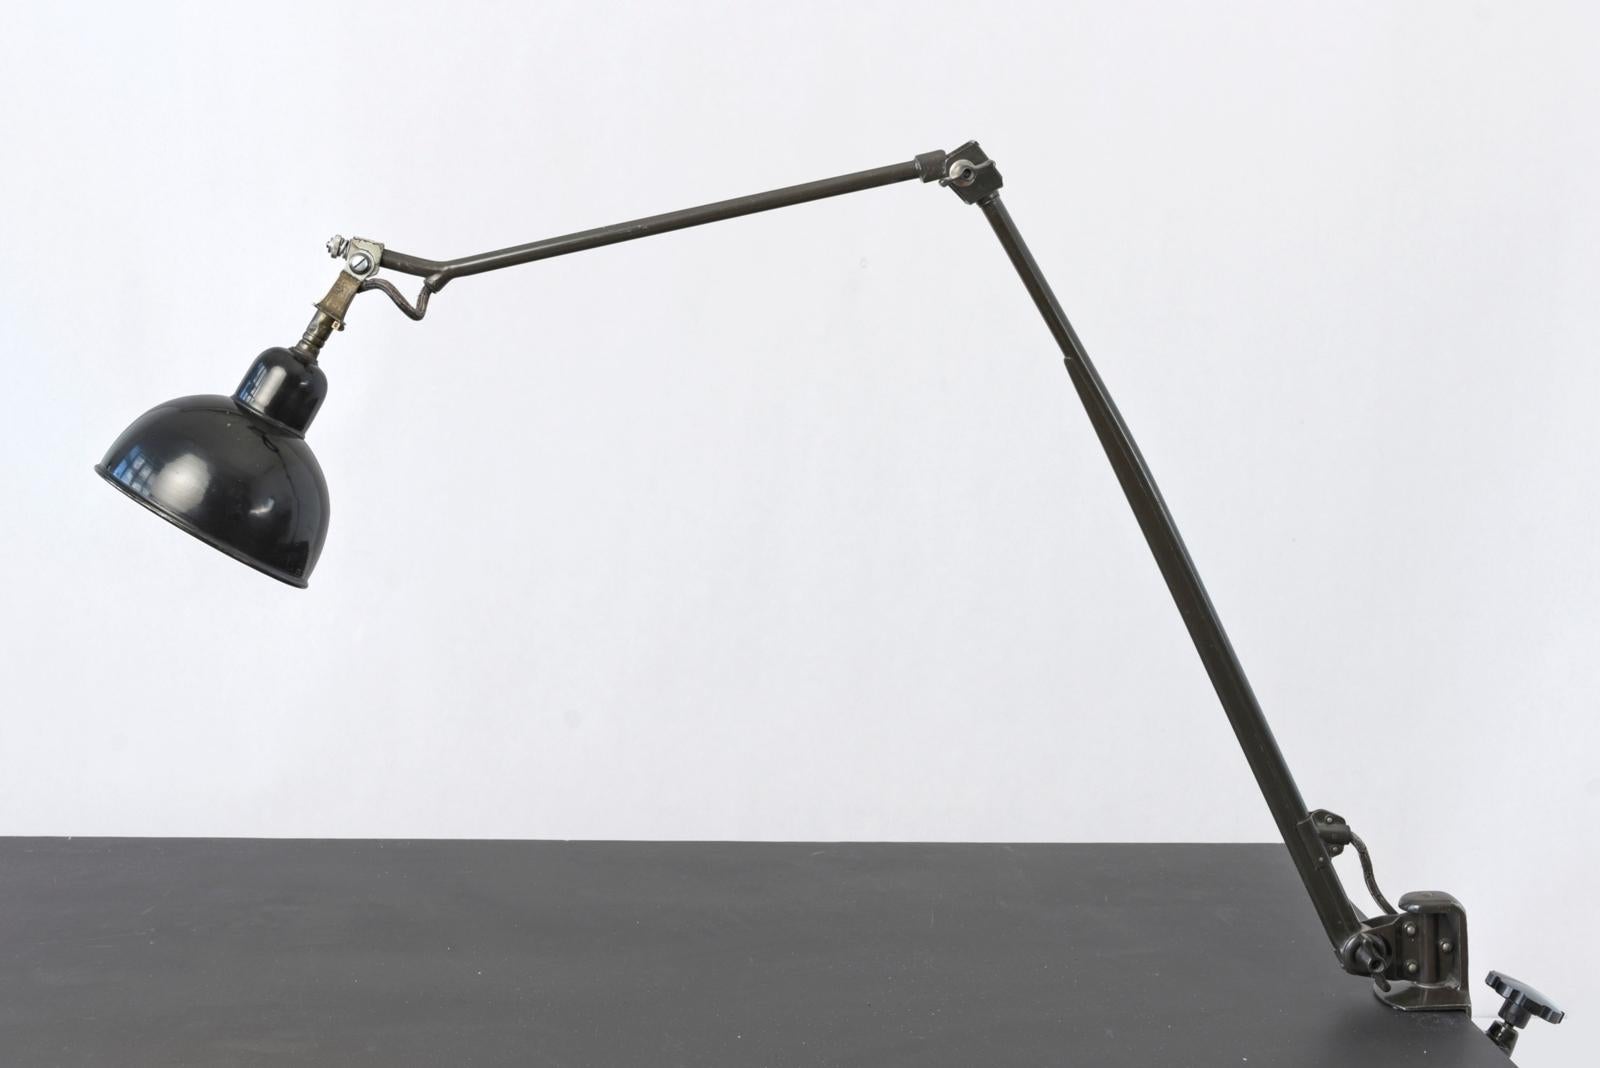 H 120 cm W 100 cm D 16.5 cm

Material: painted sheet steel, nickel-plated brass, painted cast iron, painted sheet iron shade, black textile-coated connection cable, one E 27 light point, switch integrated in the socket.

Condition: good

Special